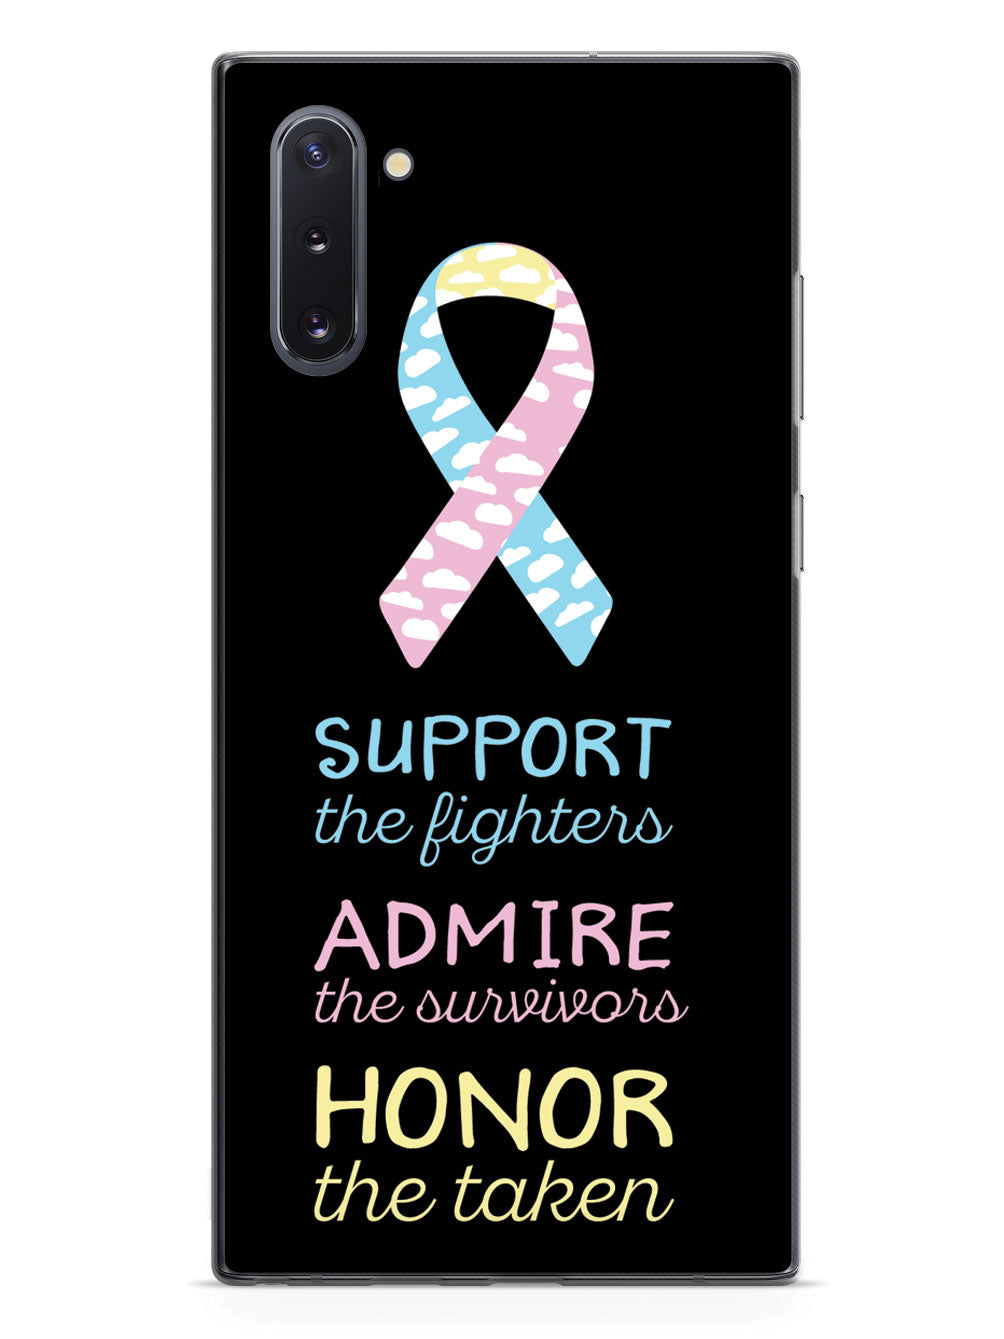 Support, Admire, Honor - CDH Awareness Case